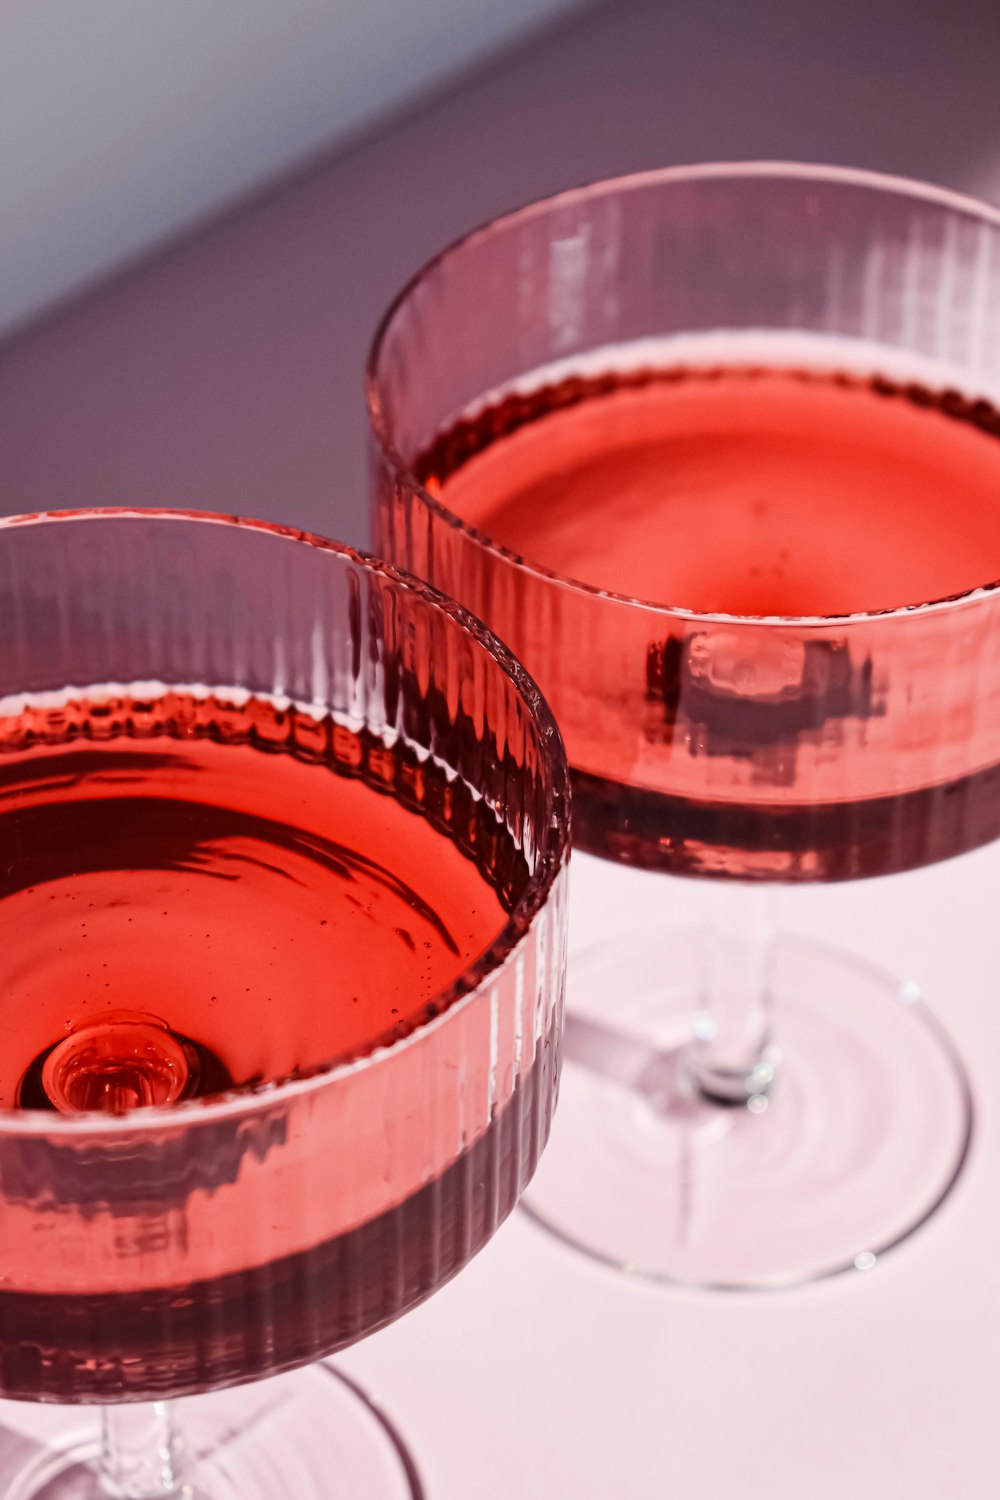 a close up of two glasses of wine